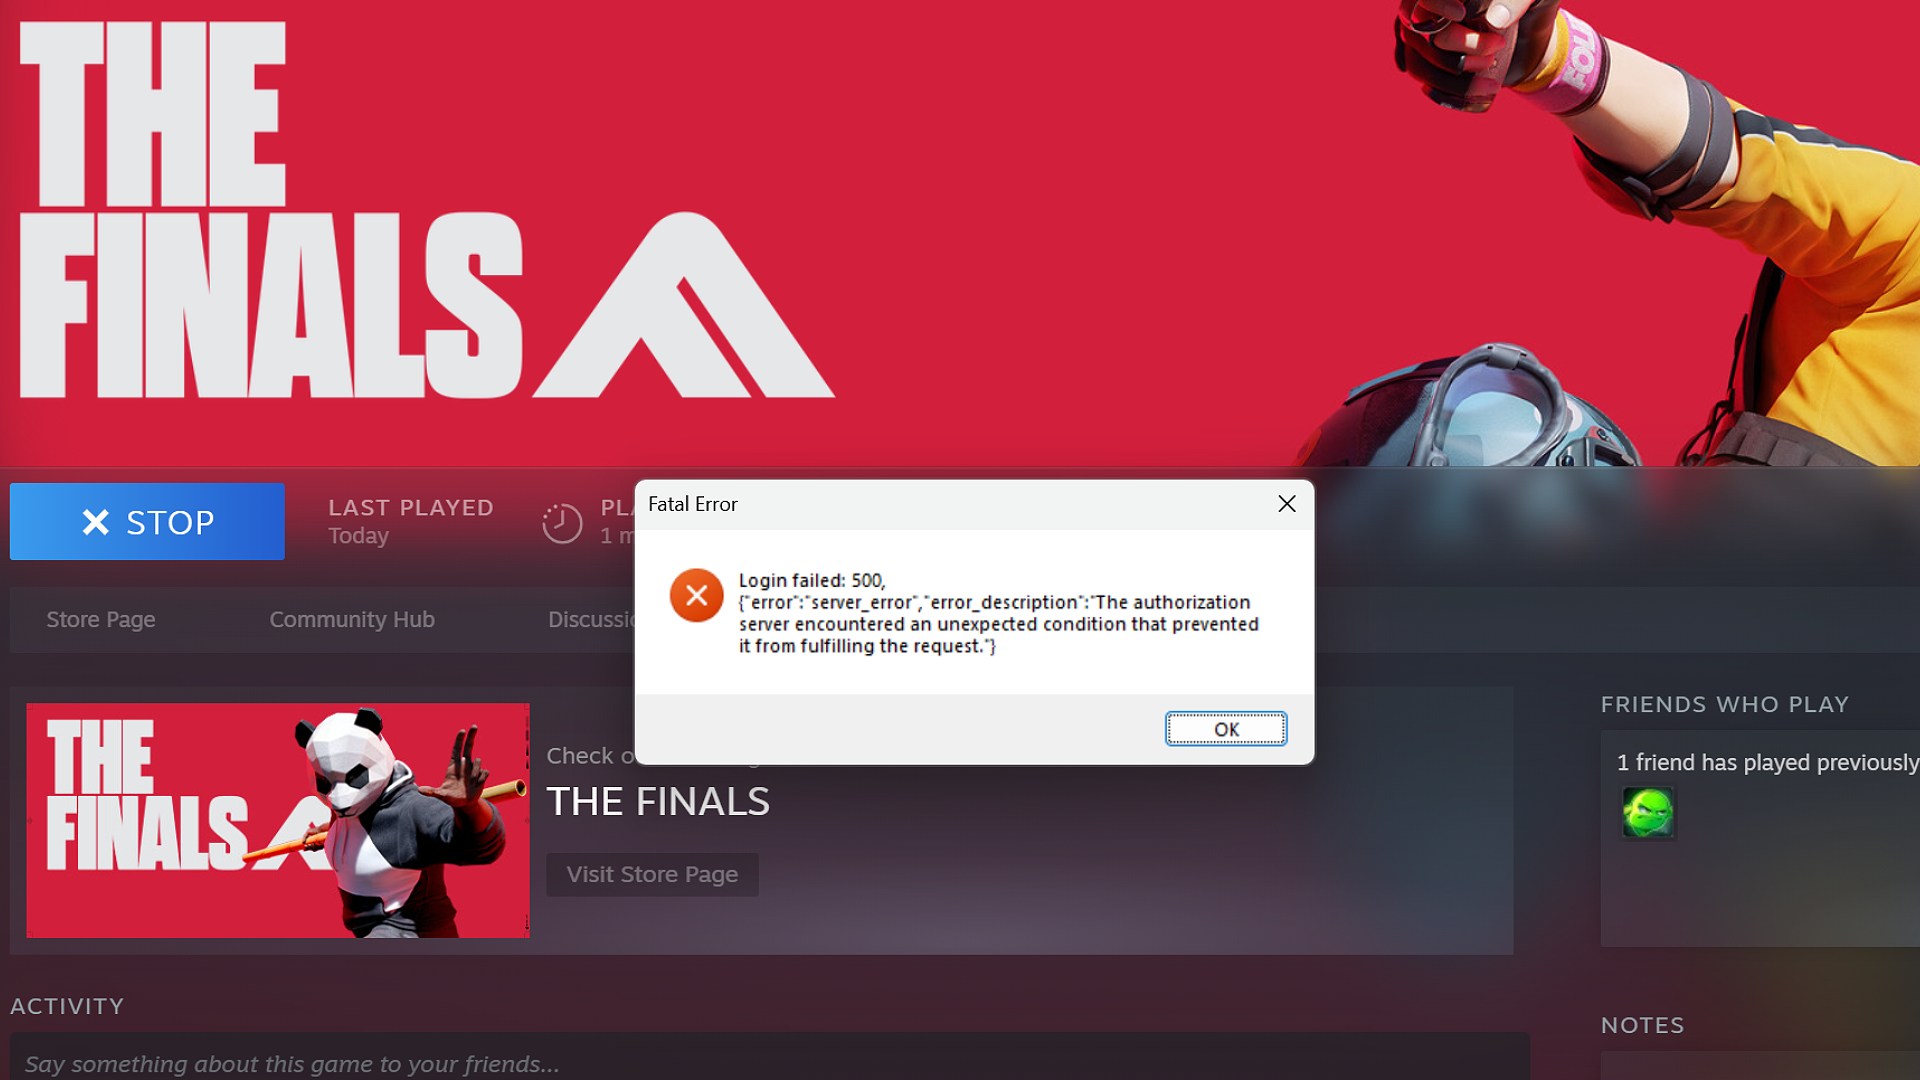 The Login 500 error for The Finals